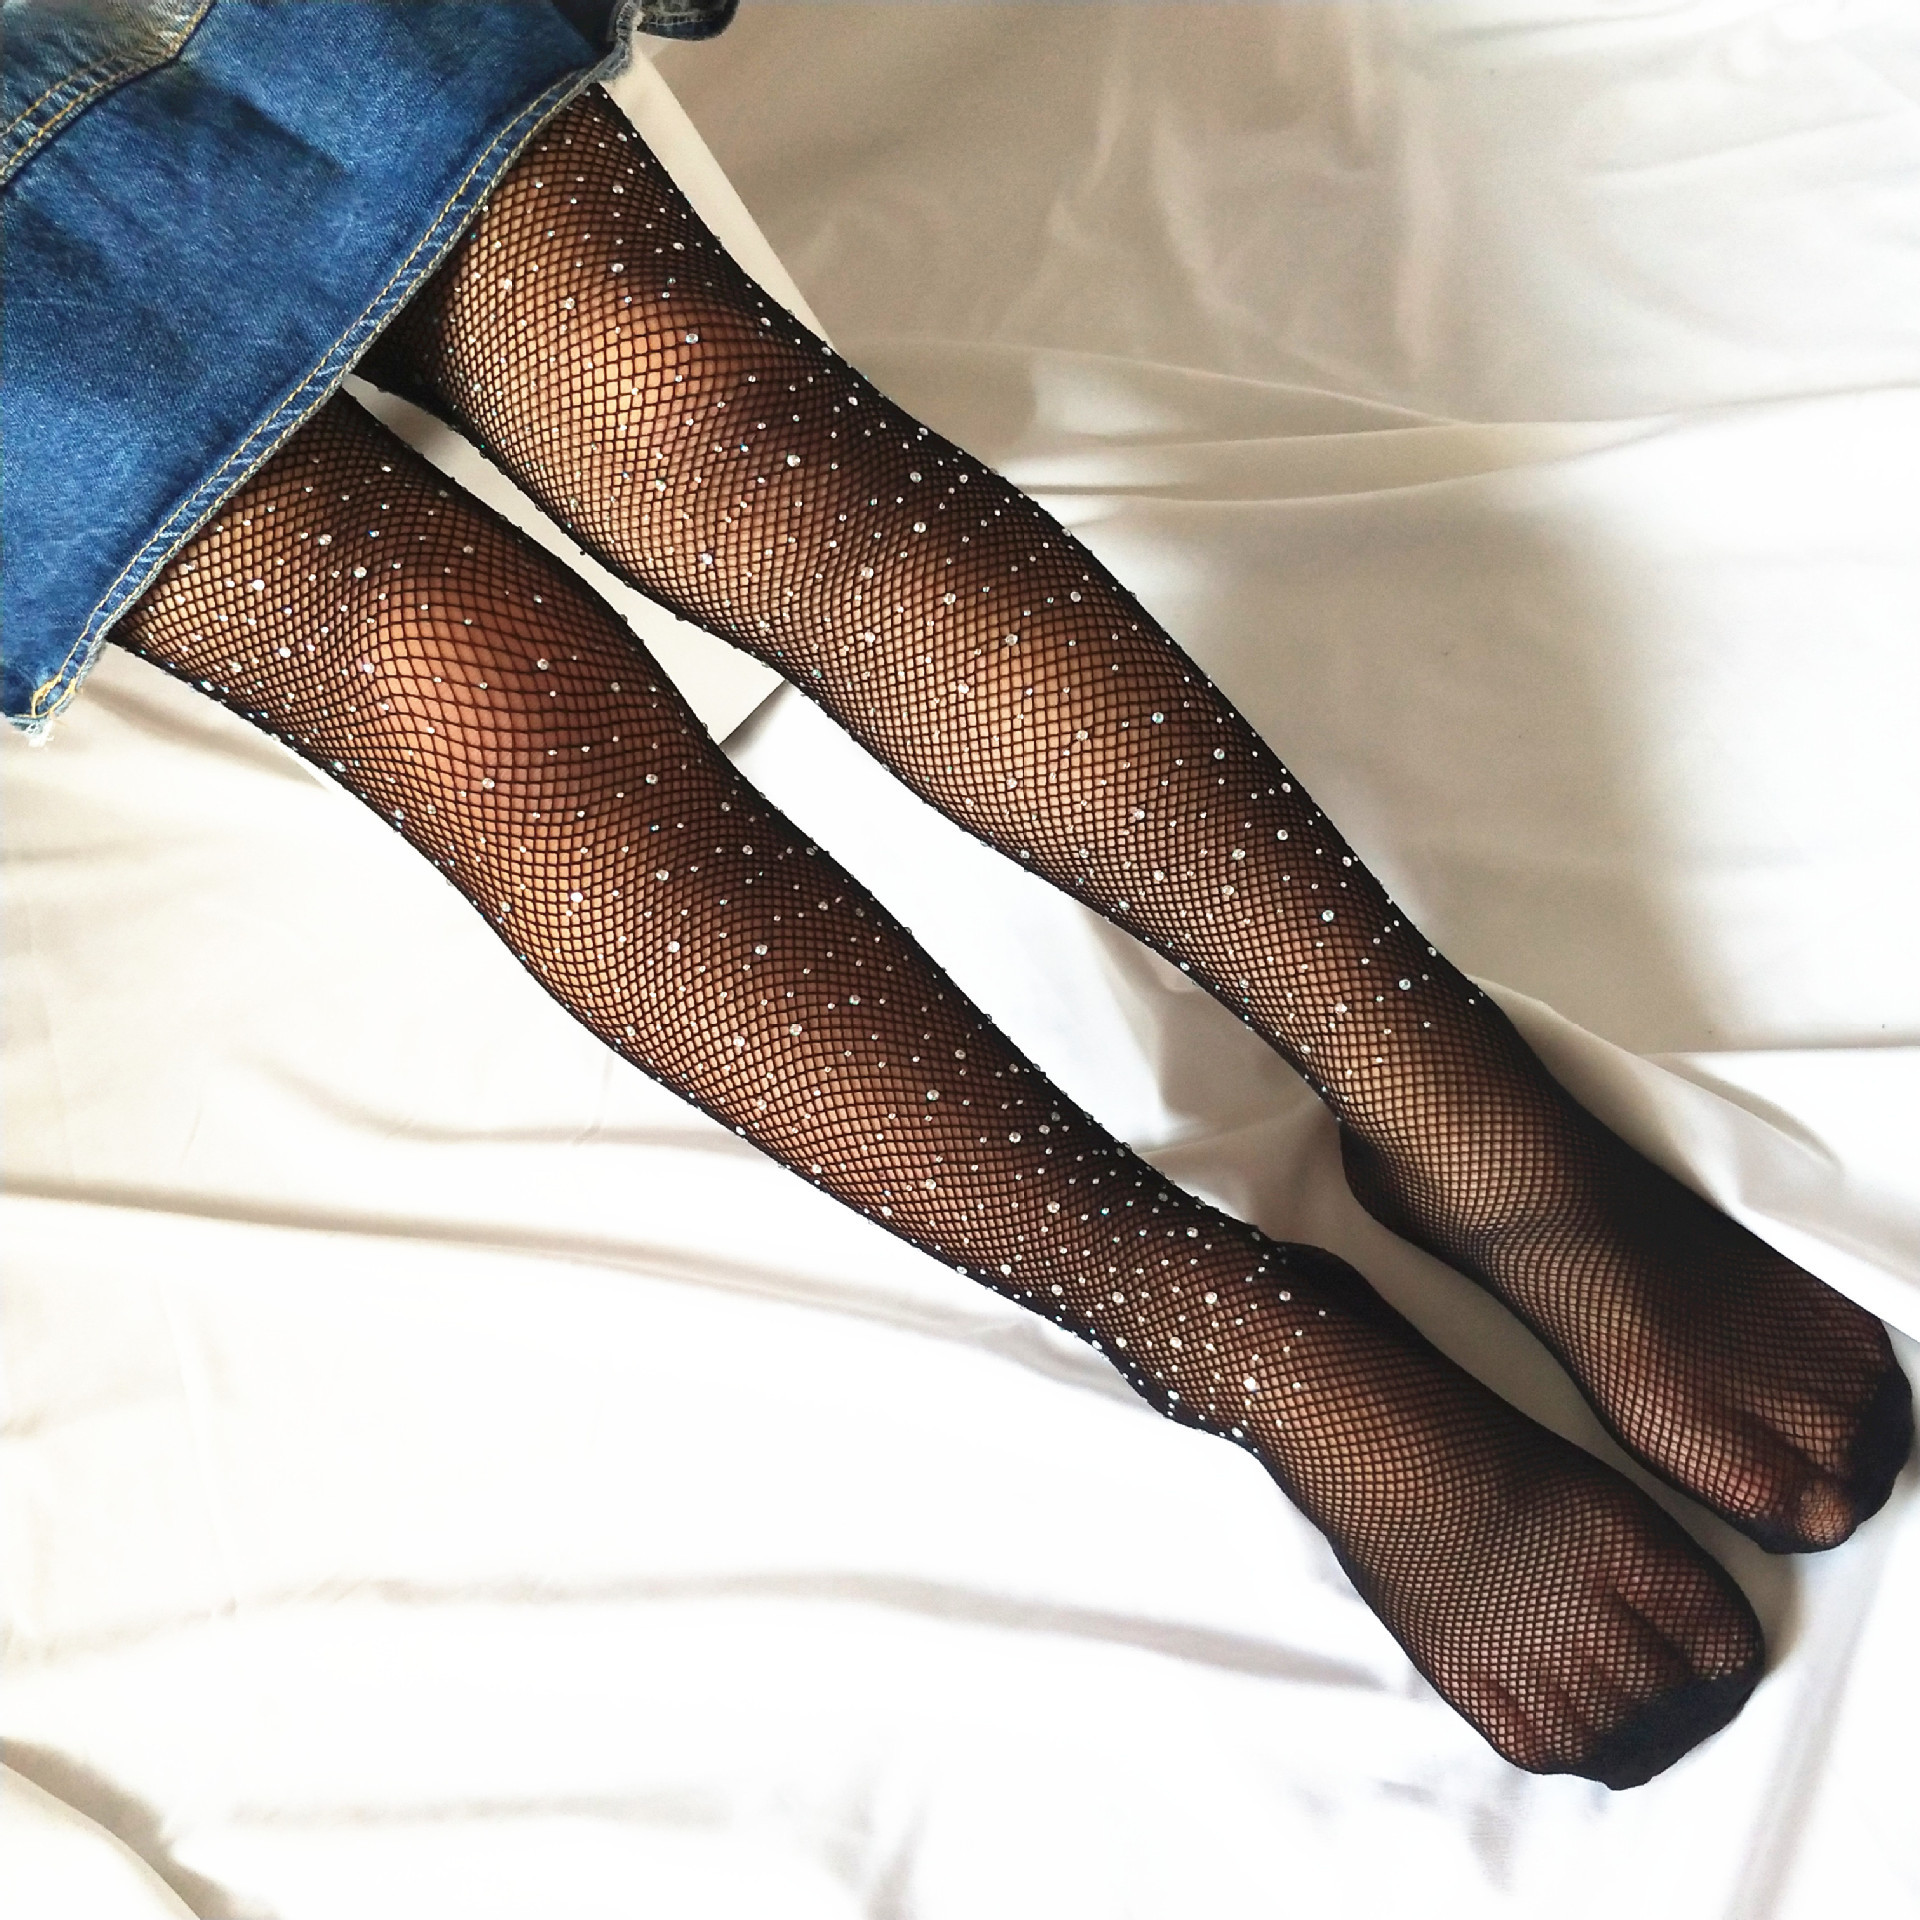 2020 Girls Mesh Net Tights Fishnet Stockings Sparkle Leggings Hollow Out  Pantyhose for 7-16 Years Old Gir